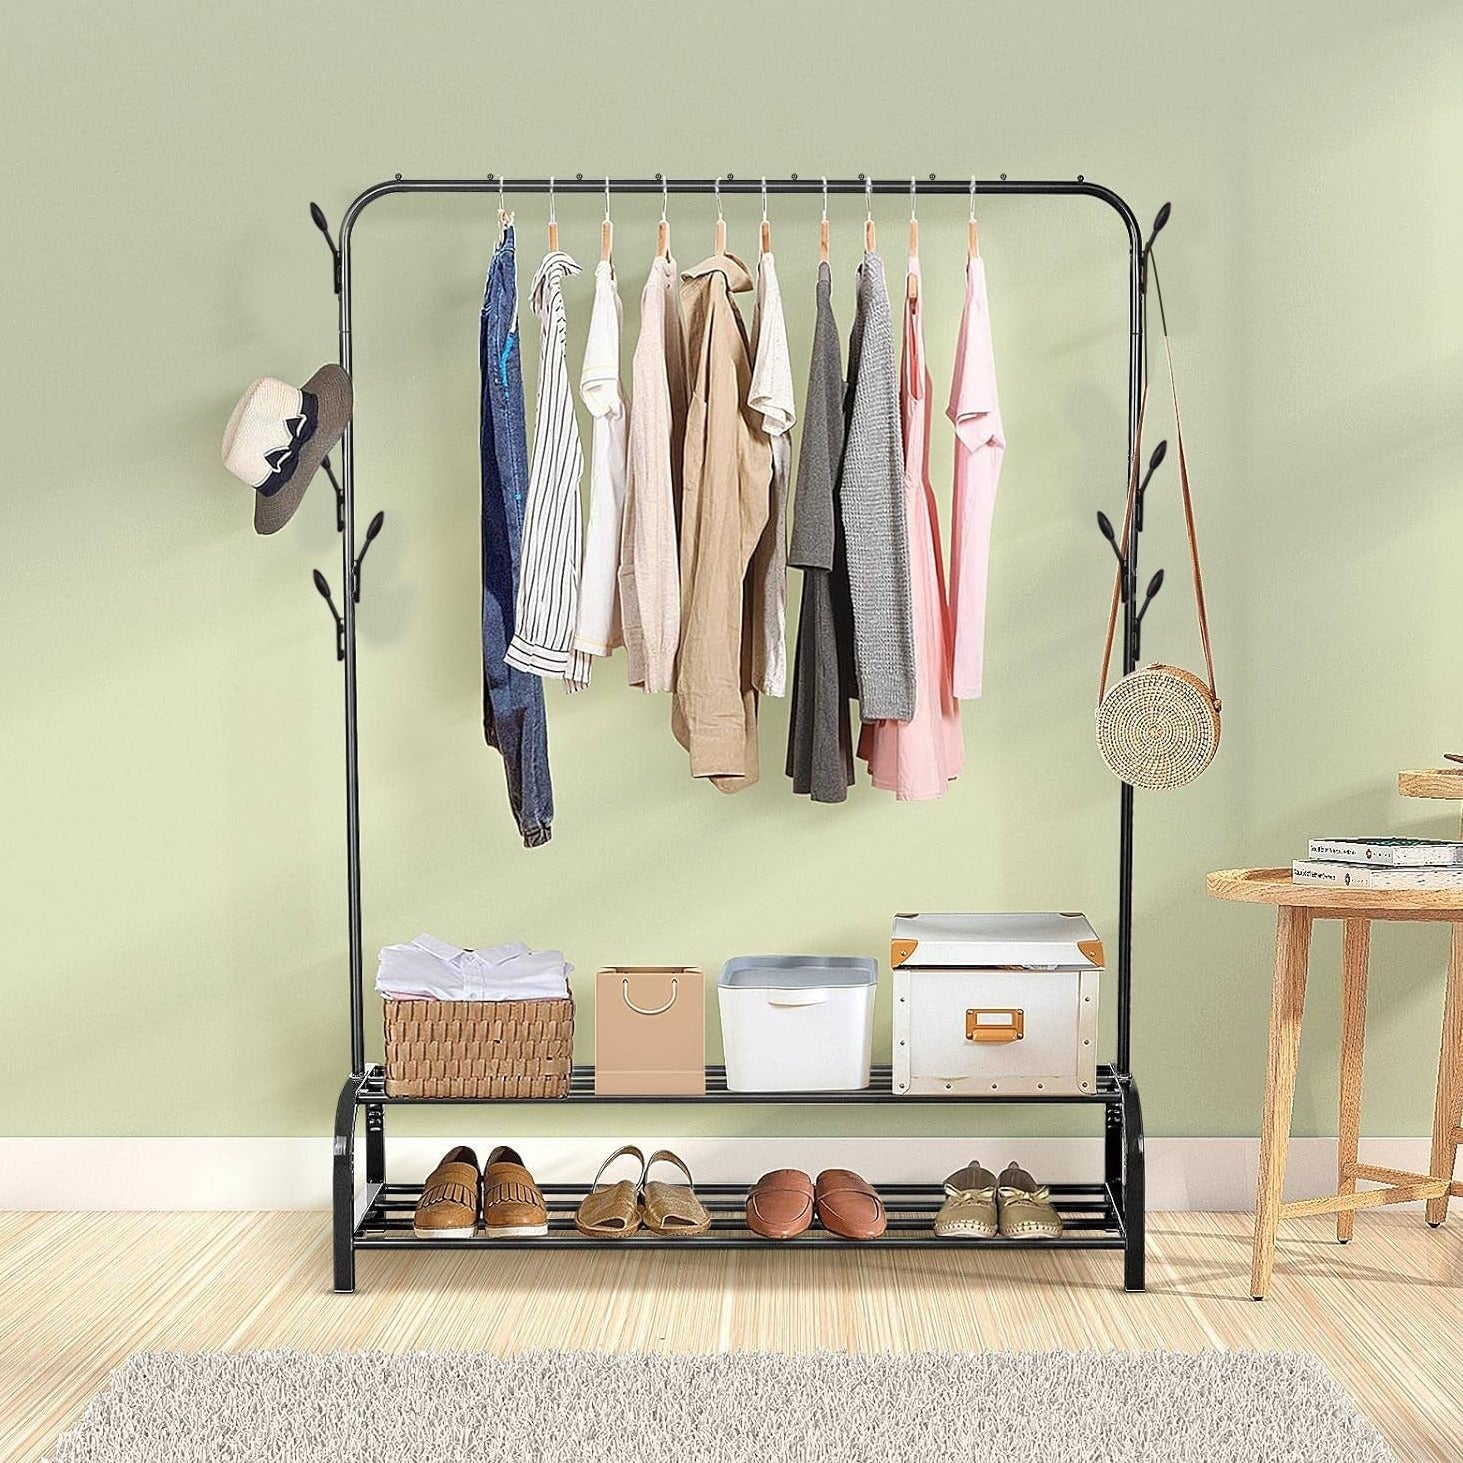 Cloth Hanging on Clothes Organizer Stand.